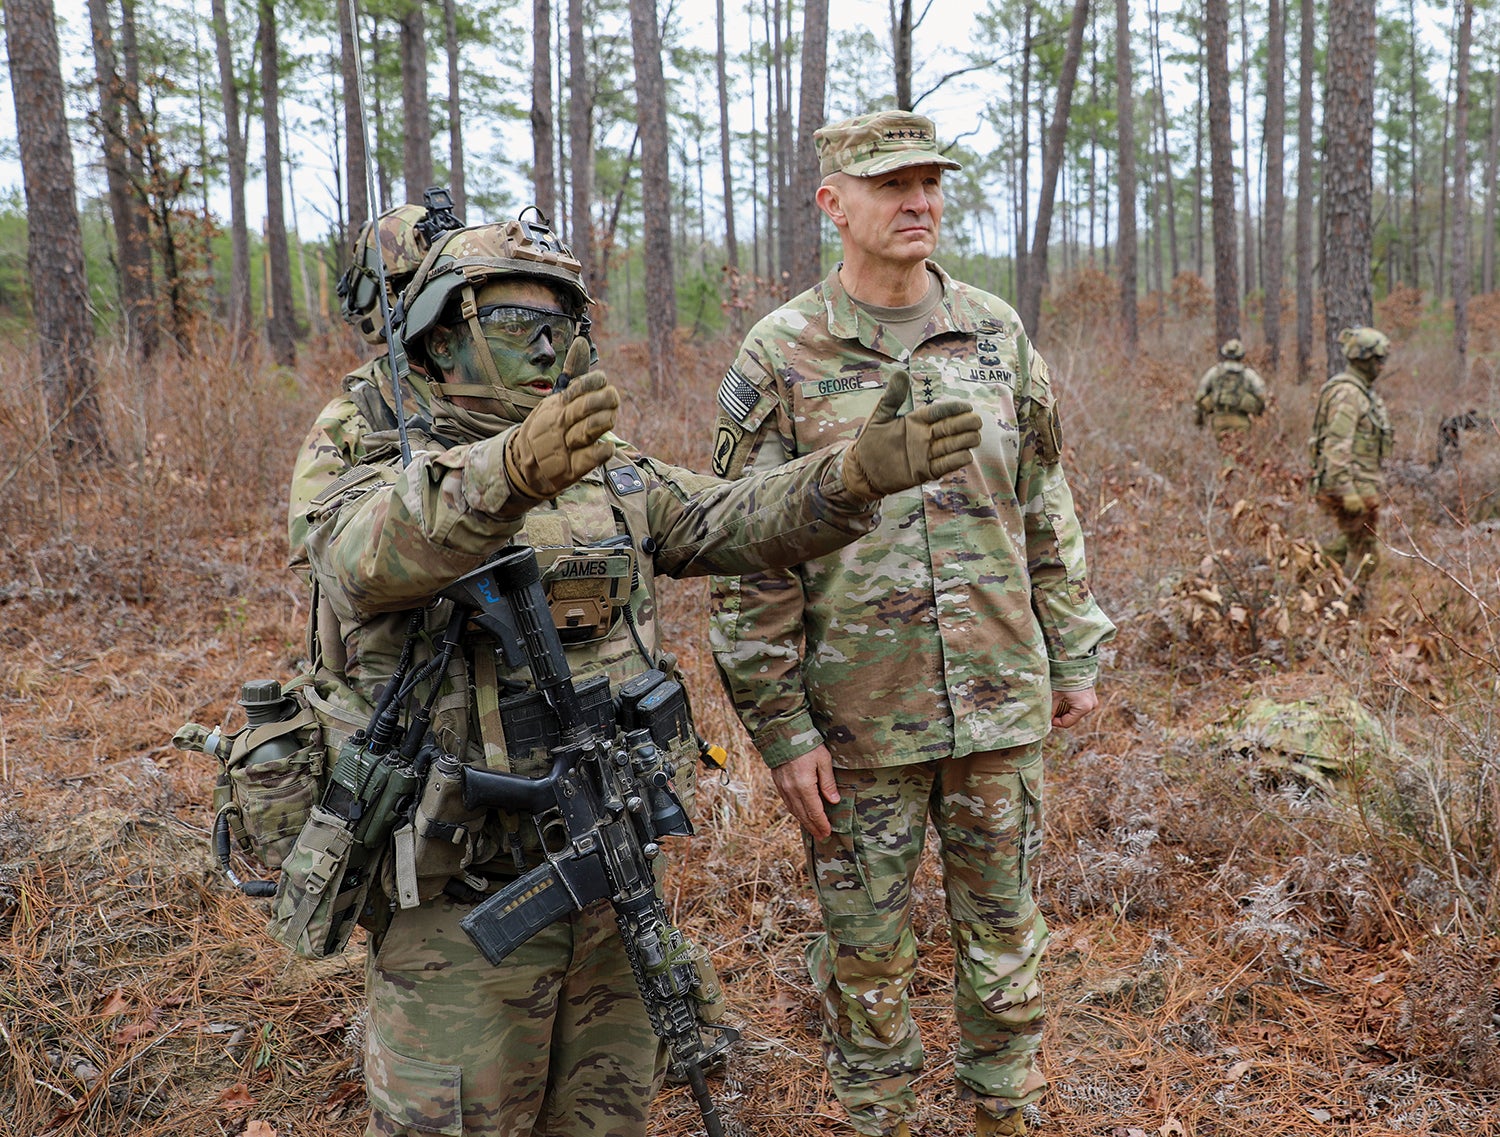 Army Chief of Staff Gen. Randy George, right, discusses troop maneuvers with a soldier from the 2nd Brigade Combat Team, 101st Airborne Division (Air Assault), at the Joint Readiness Training Center, Fort Johnson, Louisiana, formerly known as Fort Polk. (Credit: U.S. Army/Shelby Waryas)